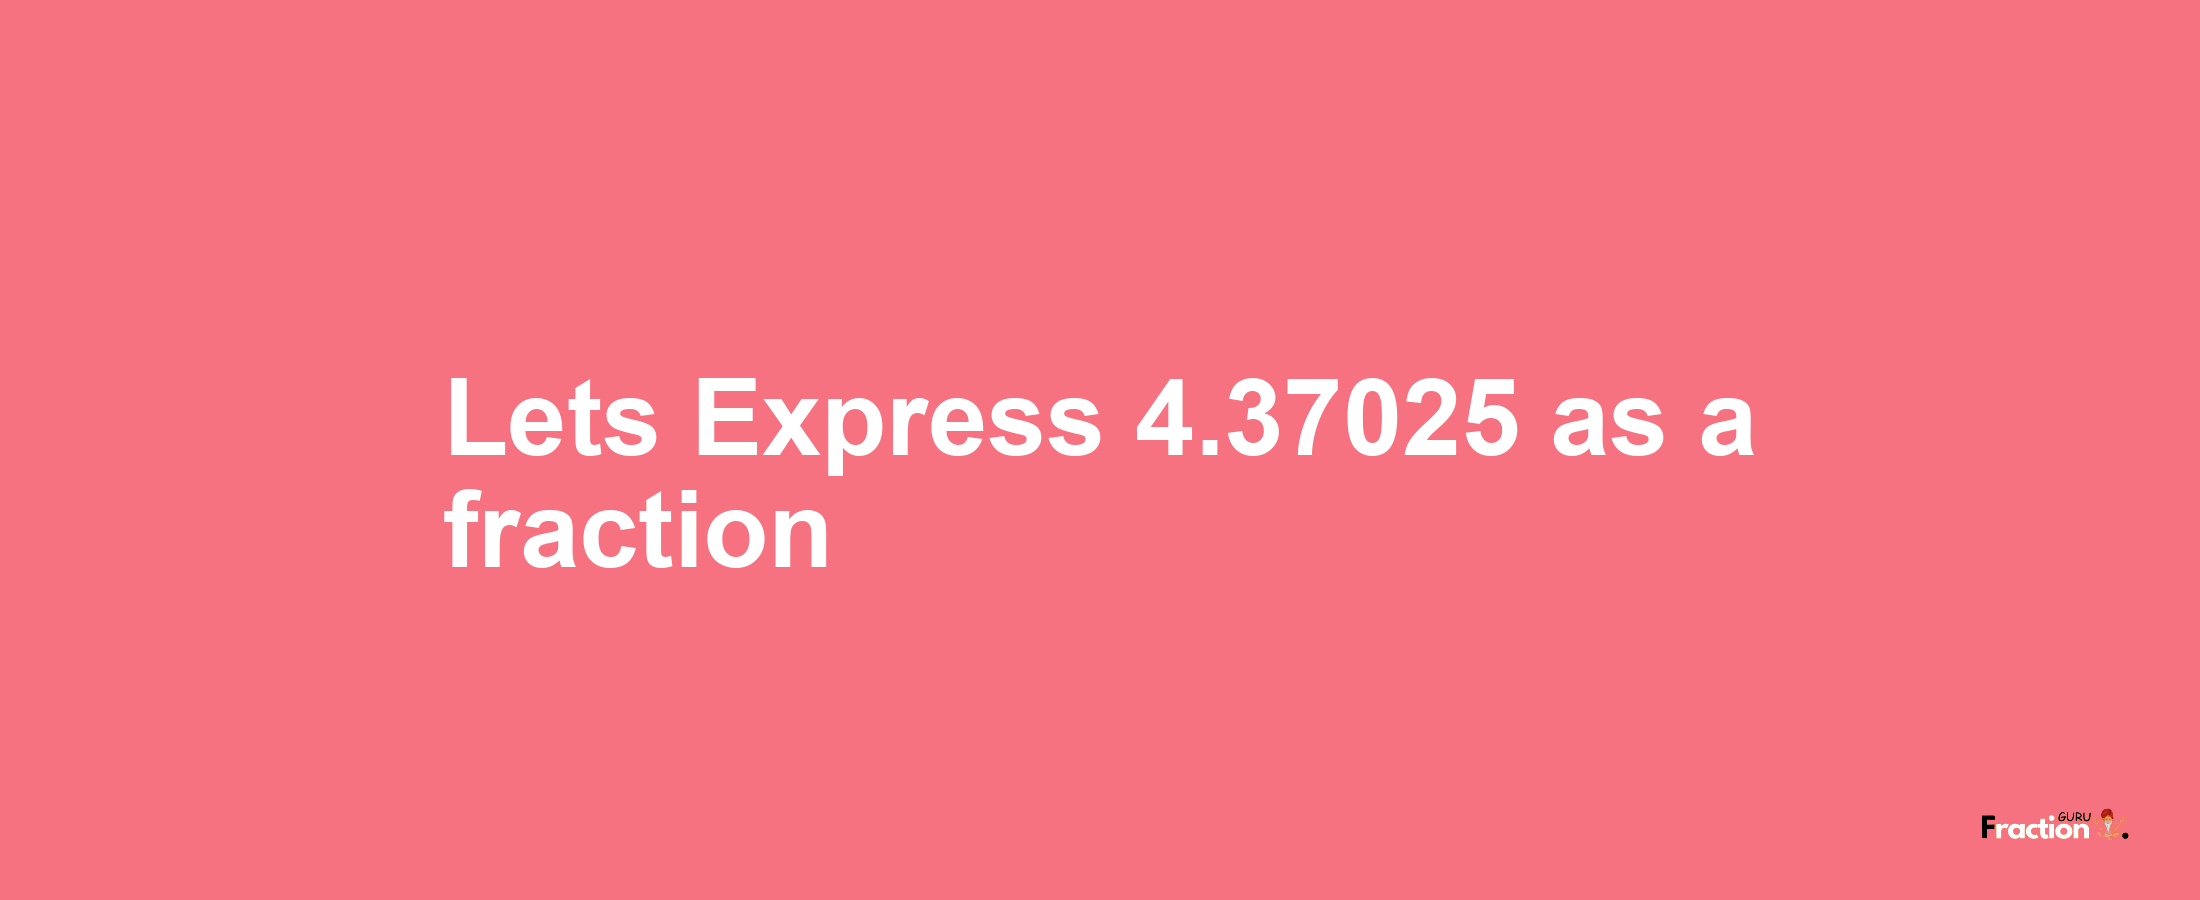 Lets Express 4.37025 as afraction